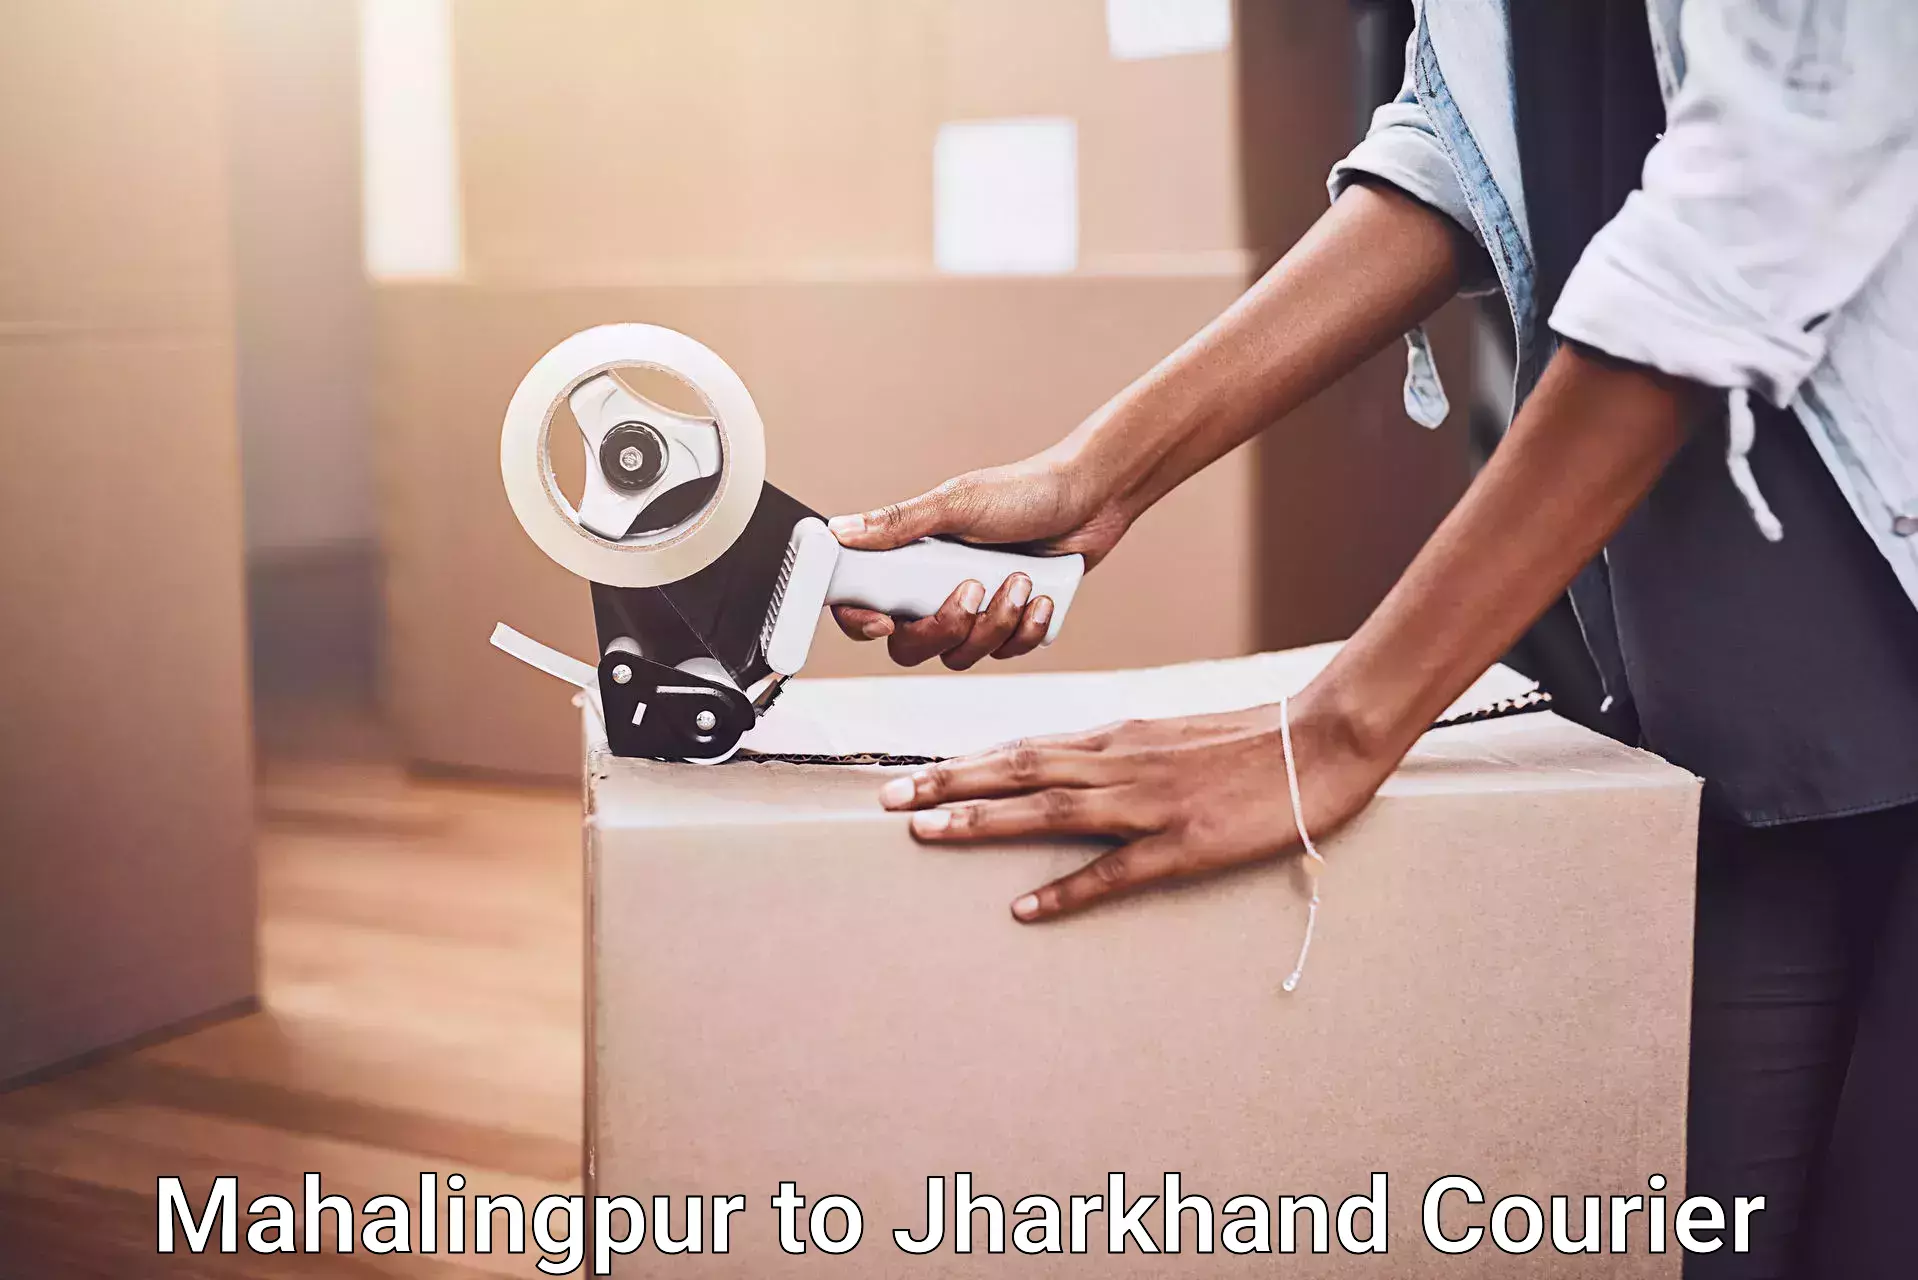 Moving and packing experts Mahalingpur to Jharkhand